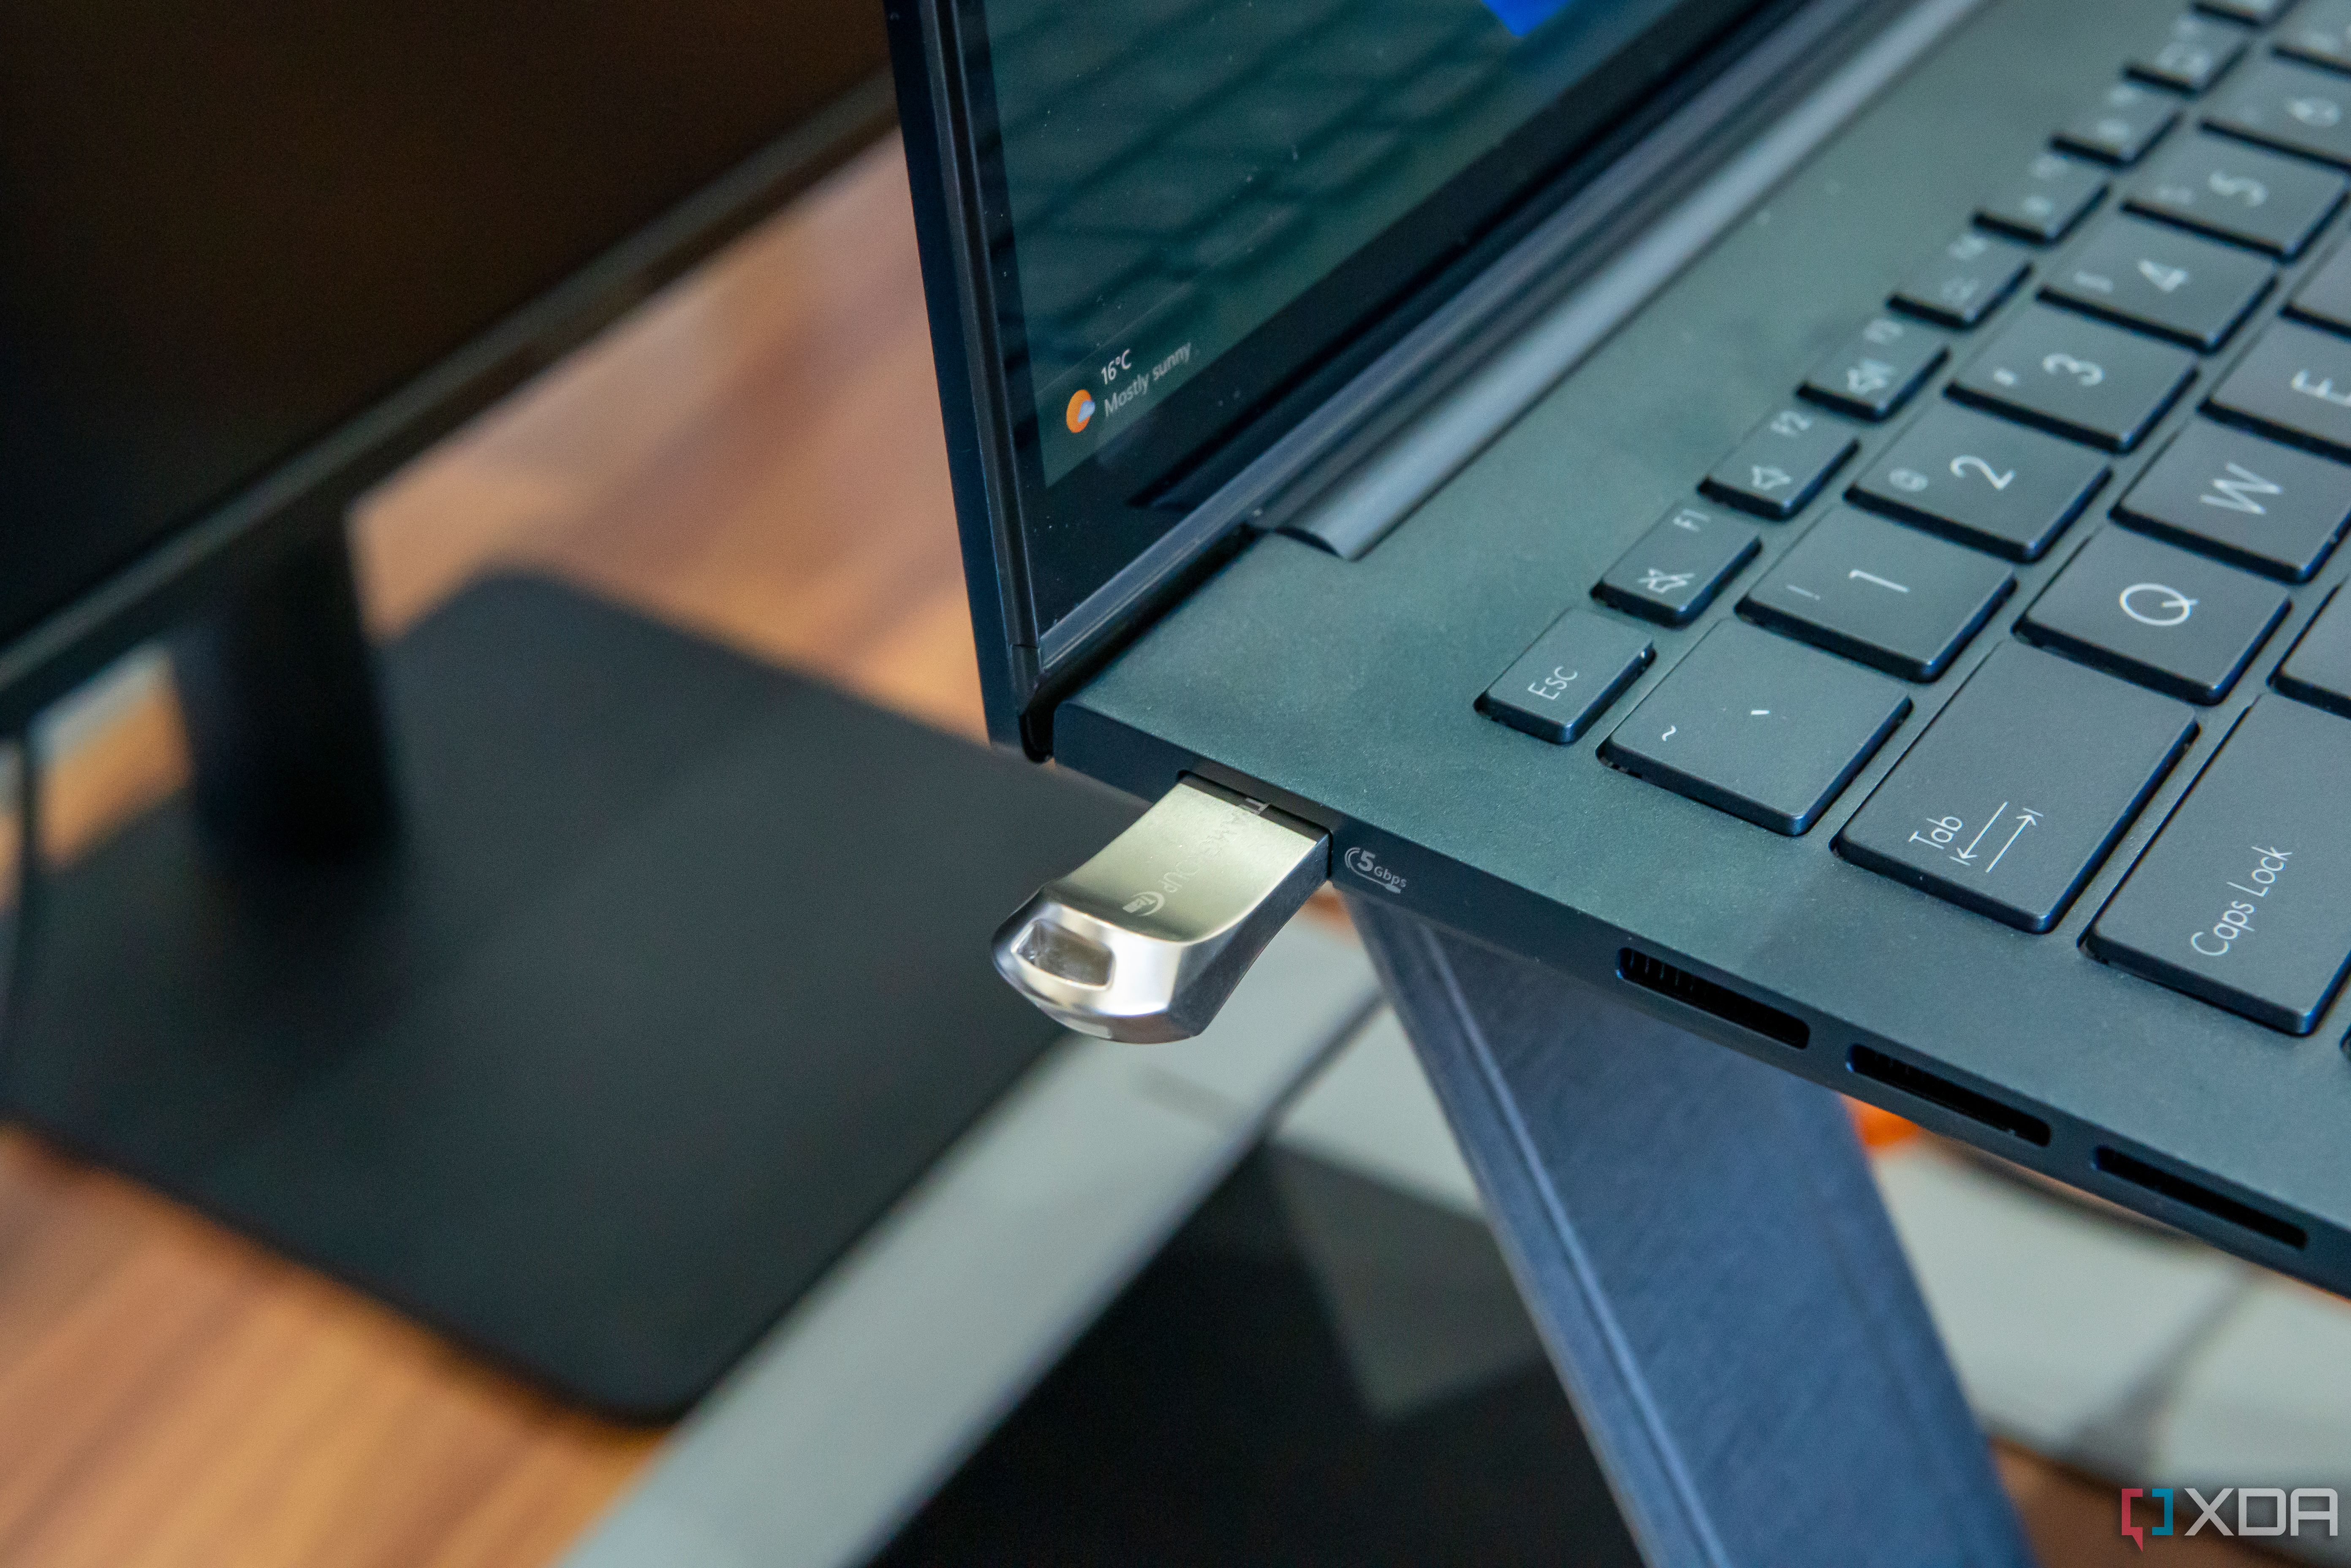 A flash drive plugged into a laptop